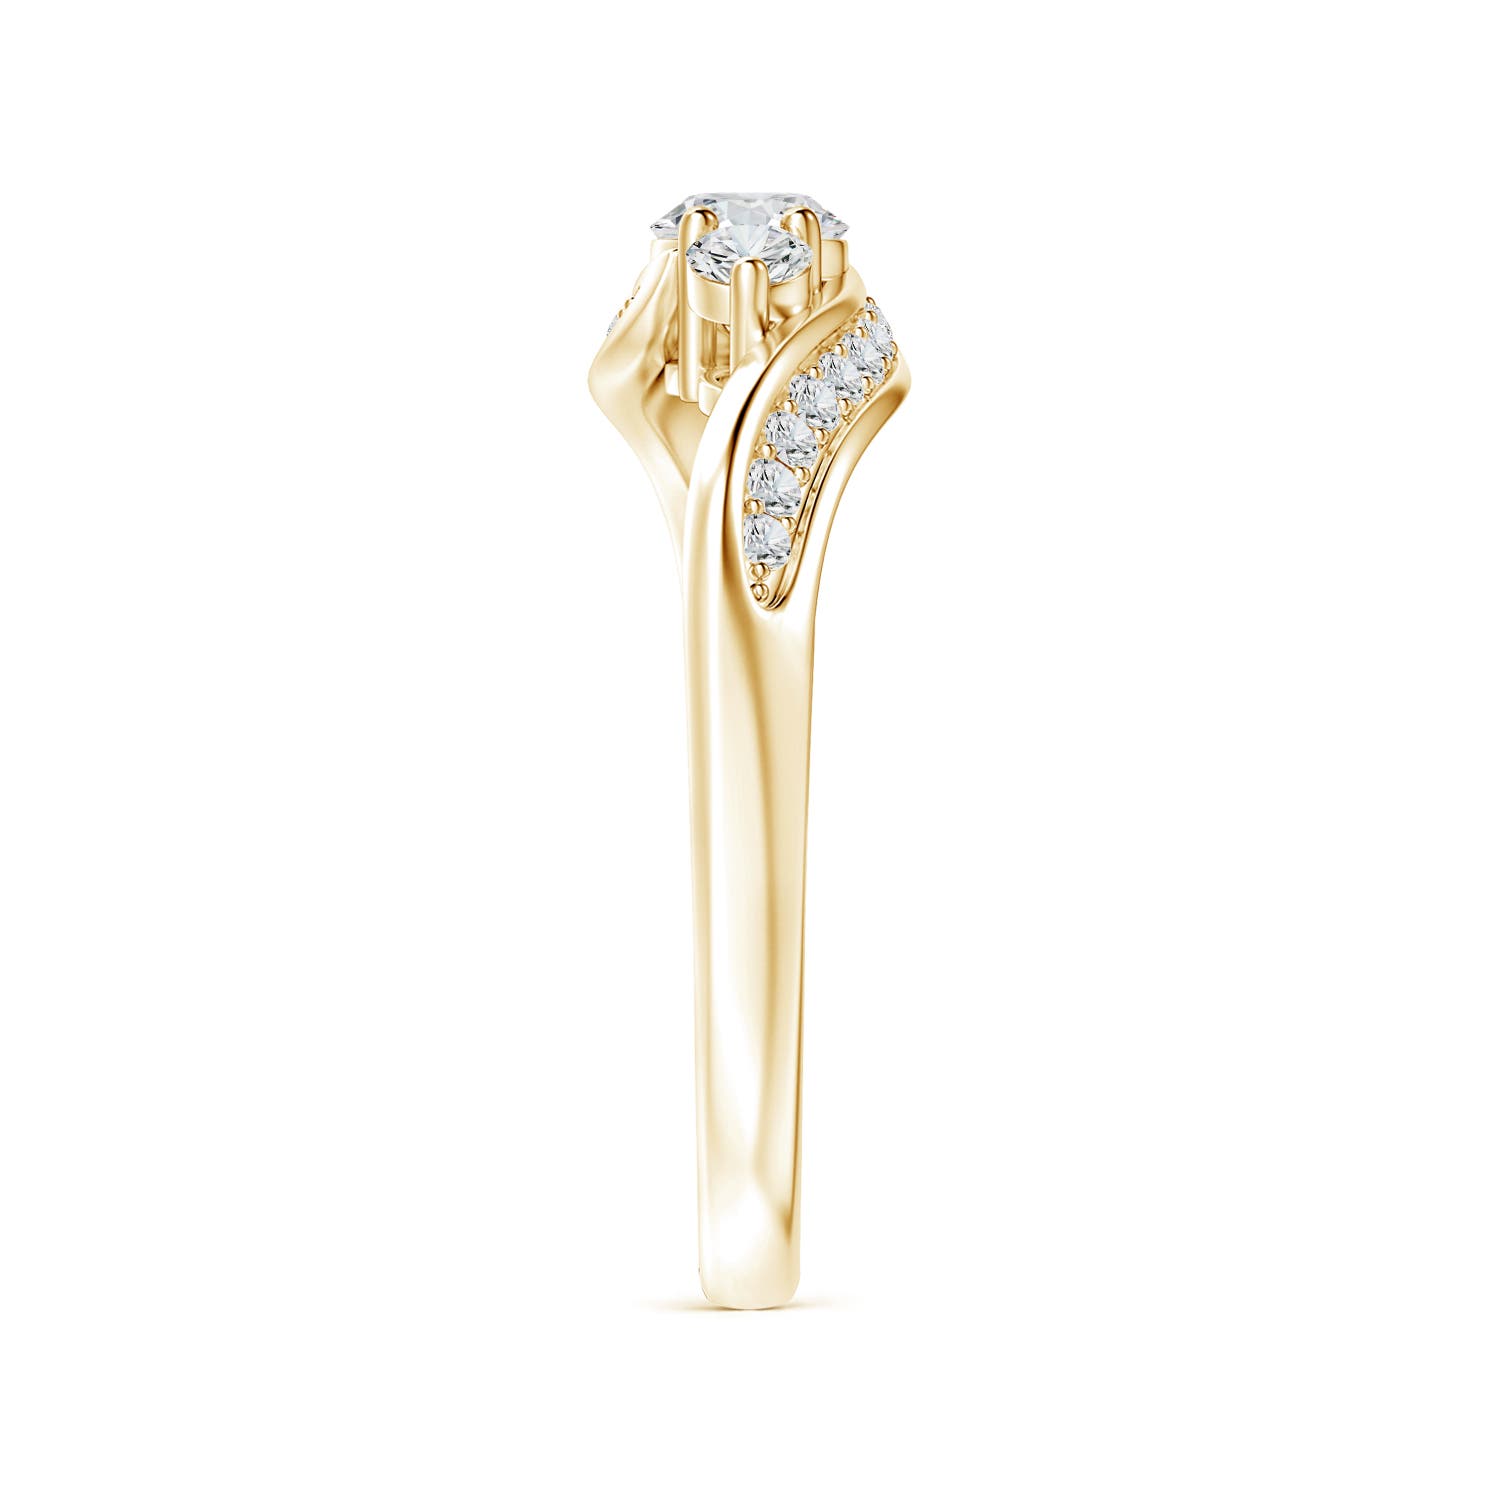 H, SI2 / 0.52 CT / 14 KT Yellow Gold